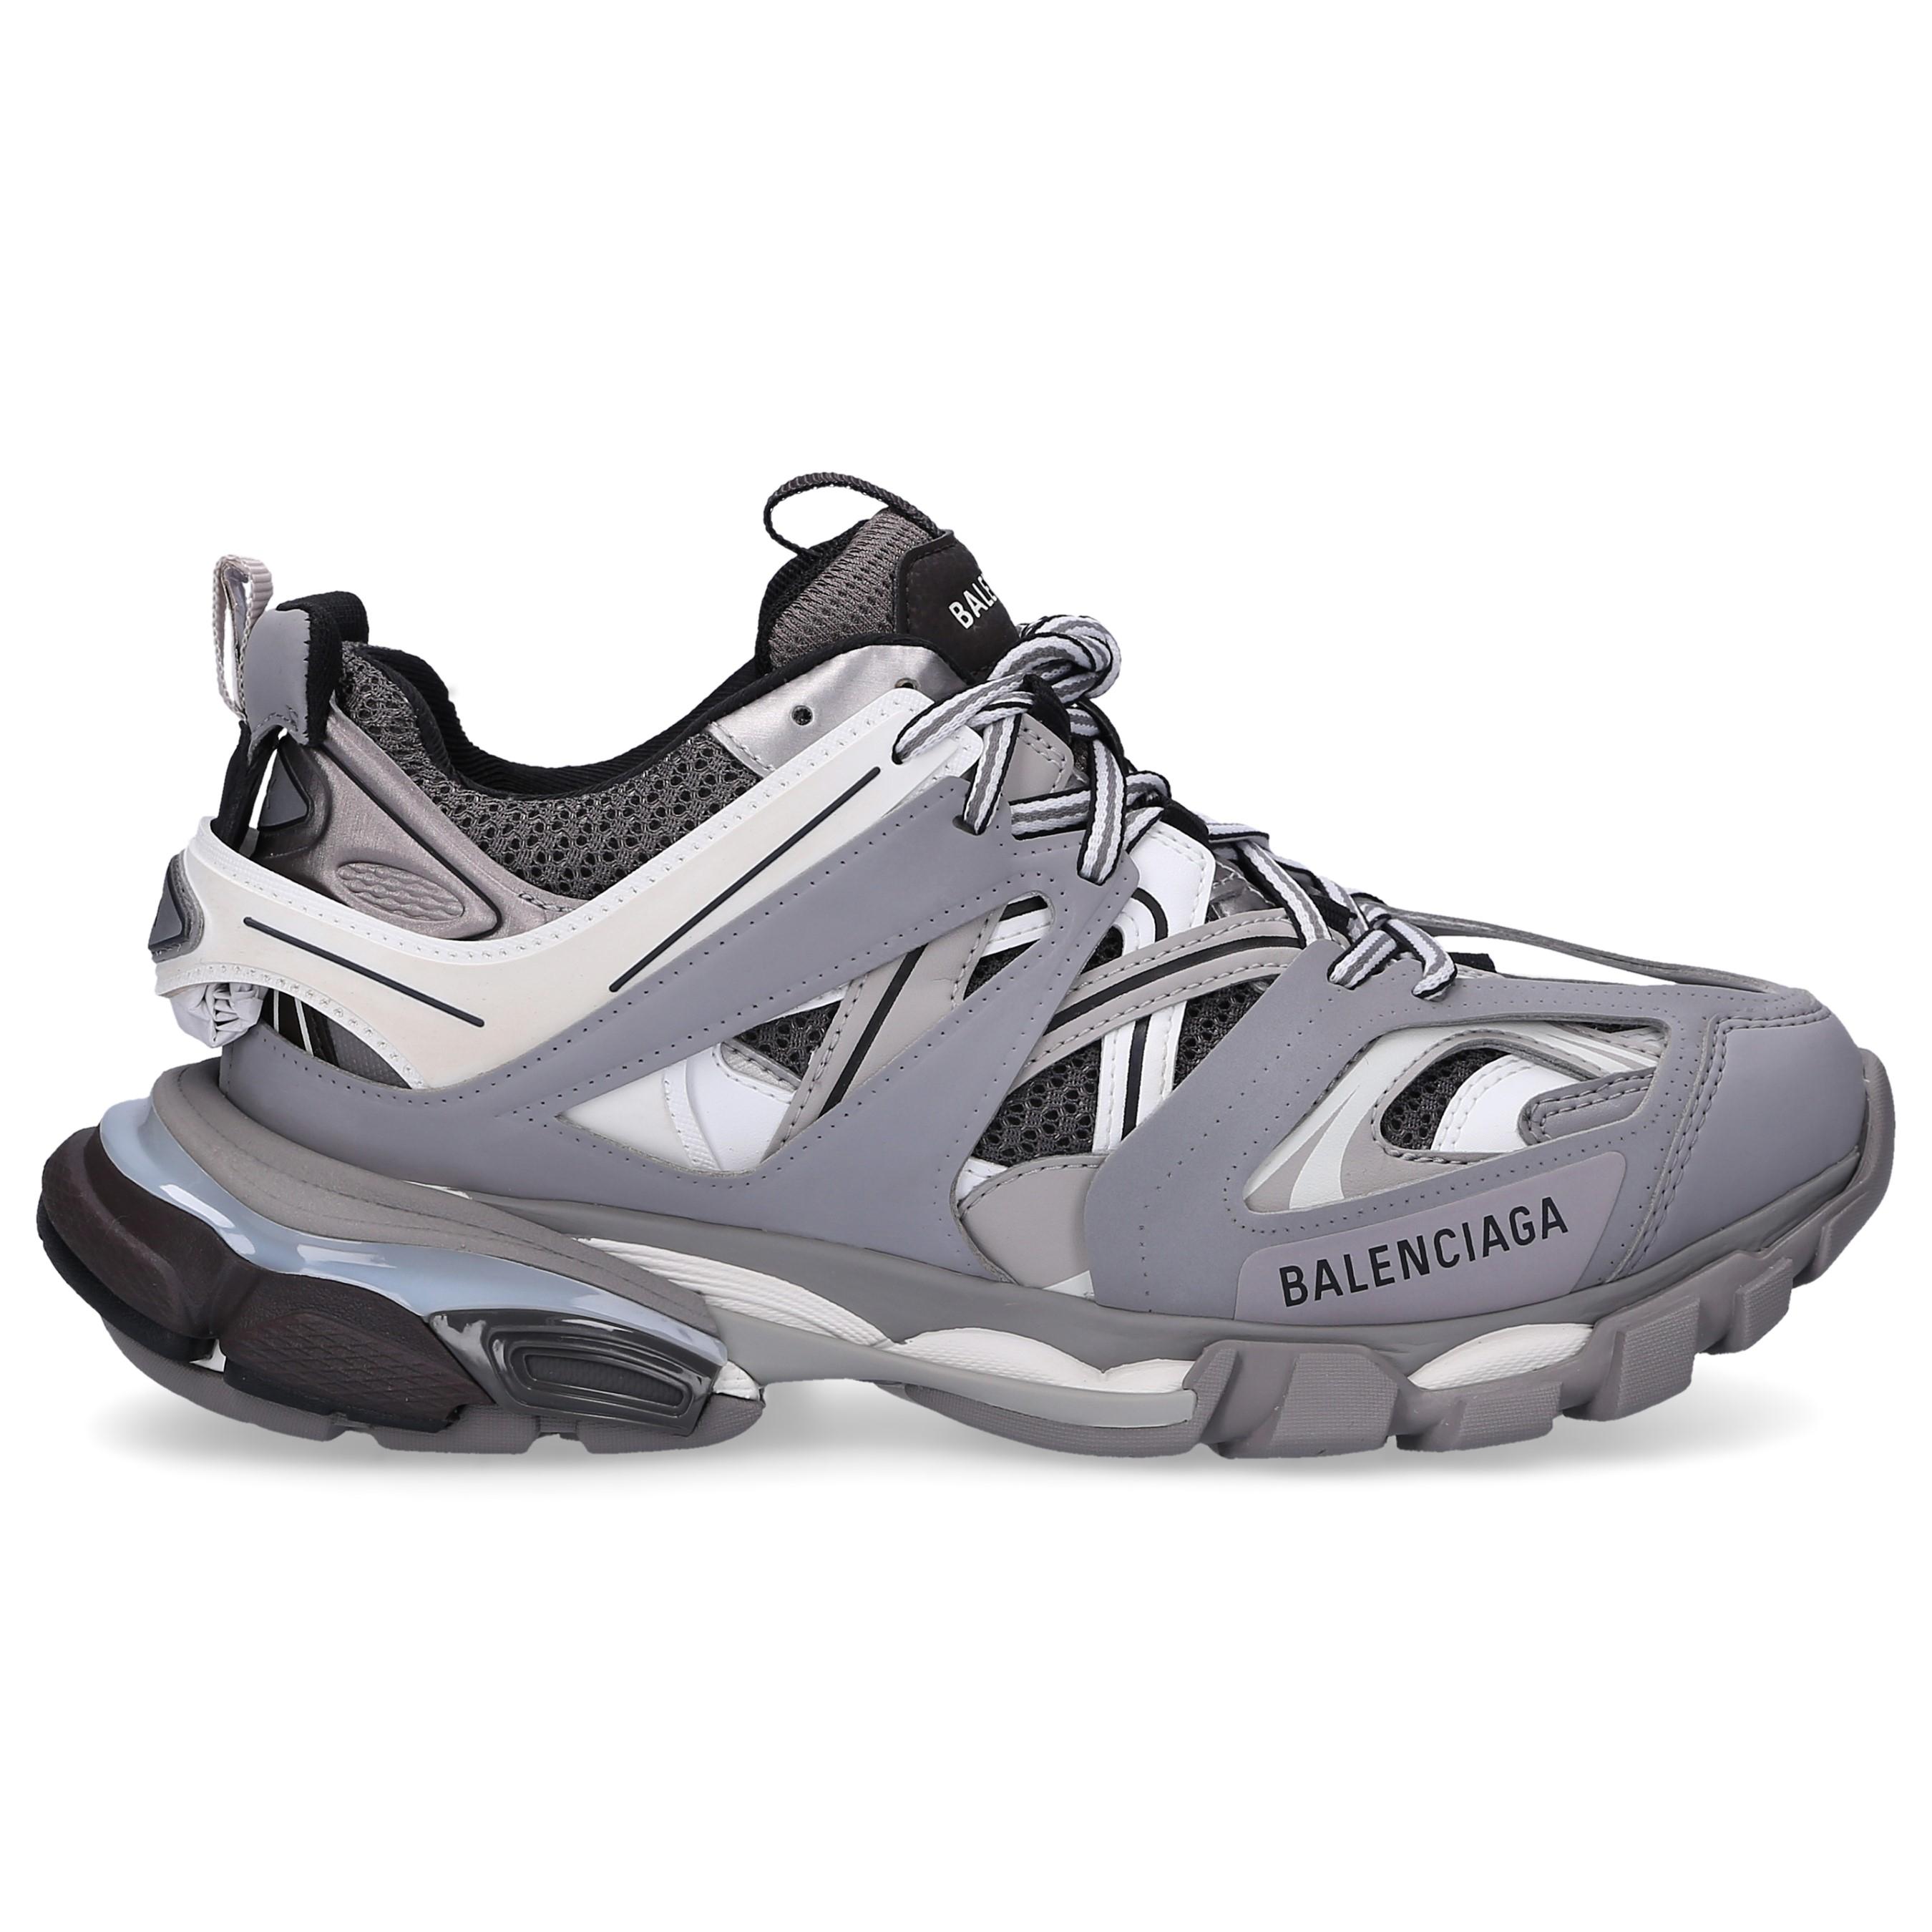 Balenciaga Rubber Track Trainers in Grey (Gray) for Men - Lyst